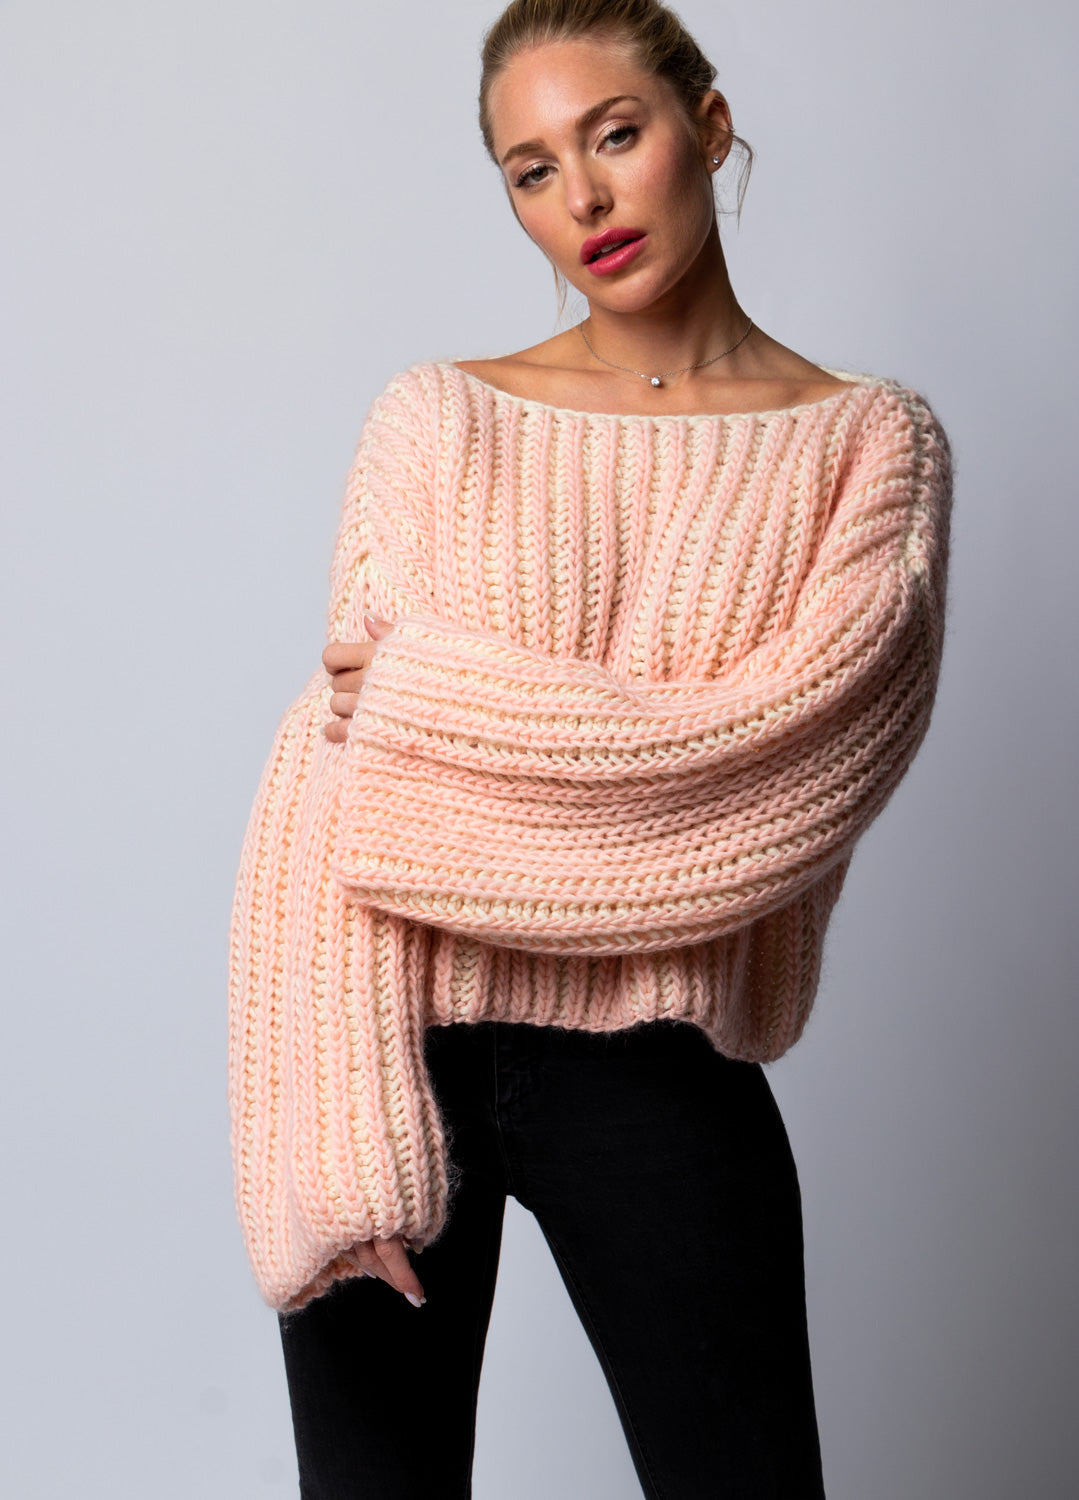 Sweaters – We are knitters